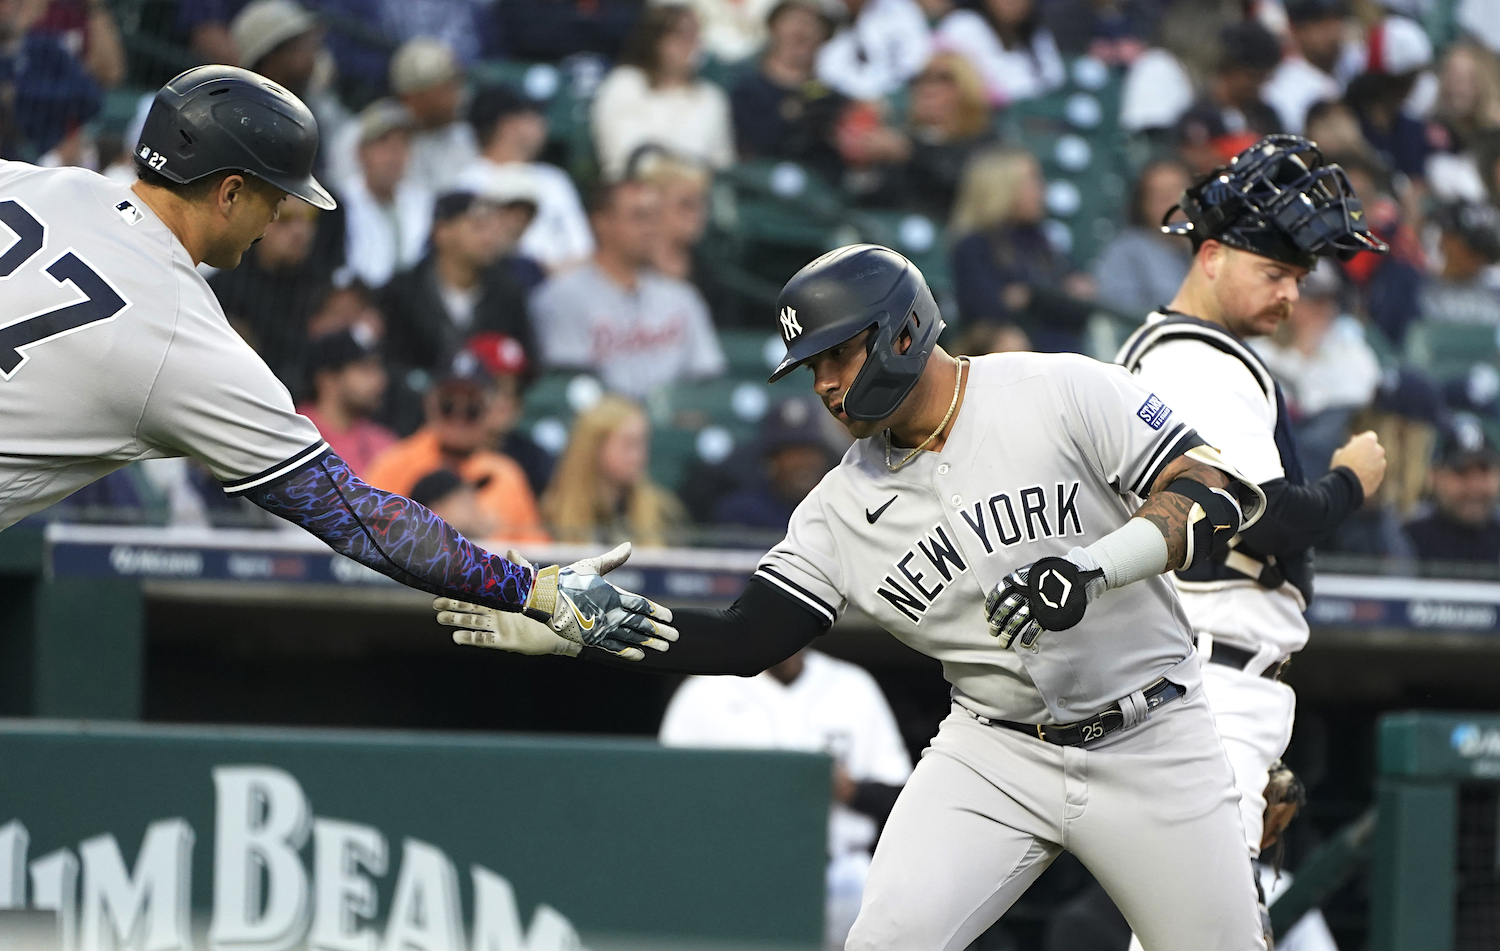 Yankees' Gleyber Torres says video board reaction not directed at